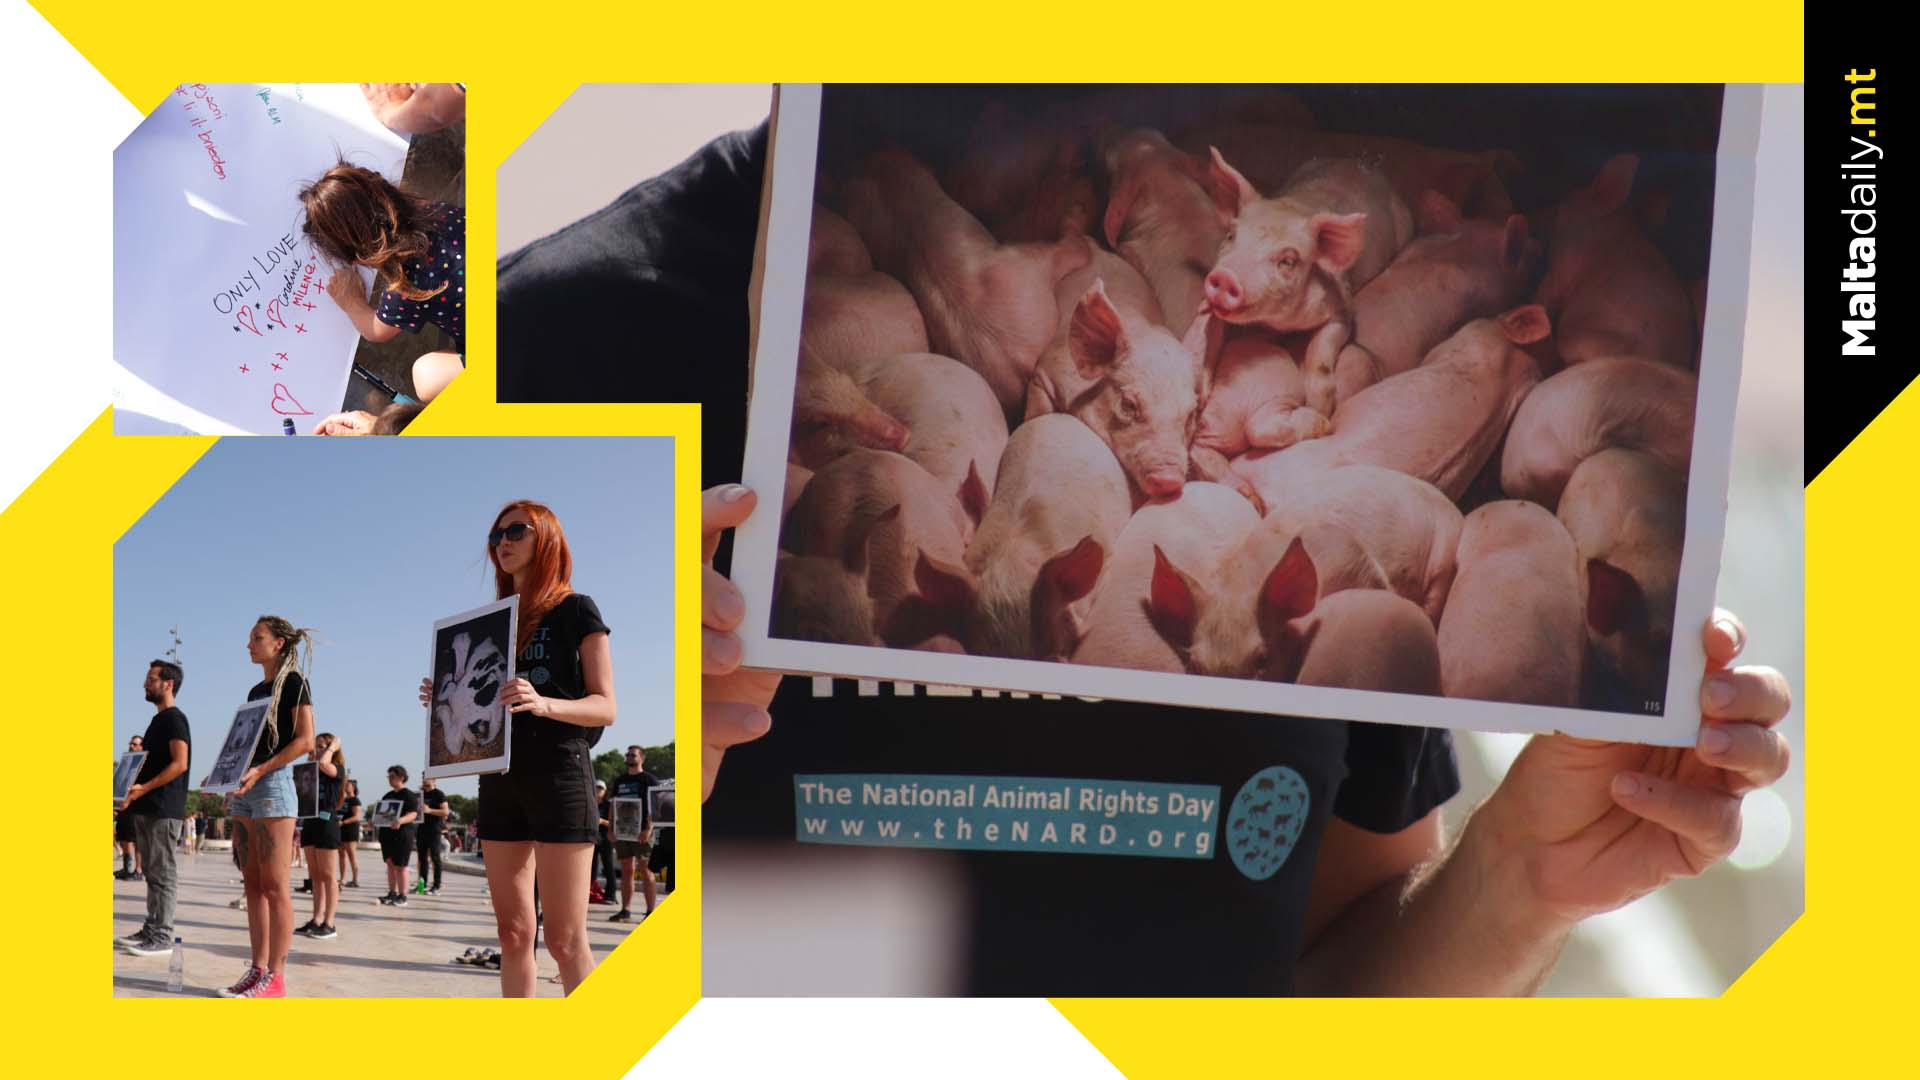 Maltese activists to join 150 cities for Animal Rights Day Protest